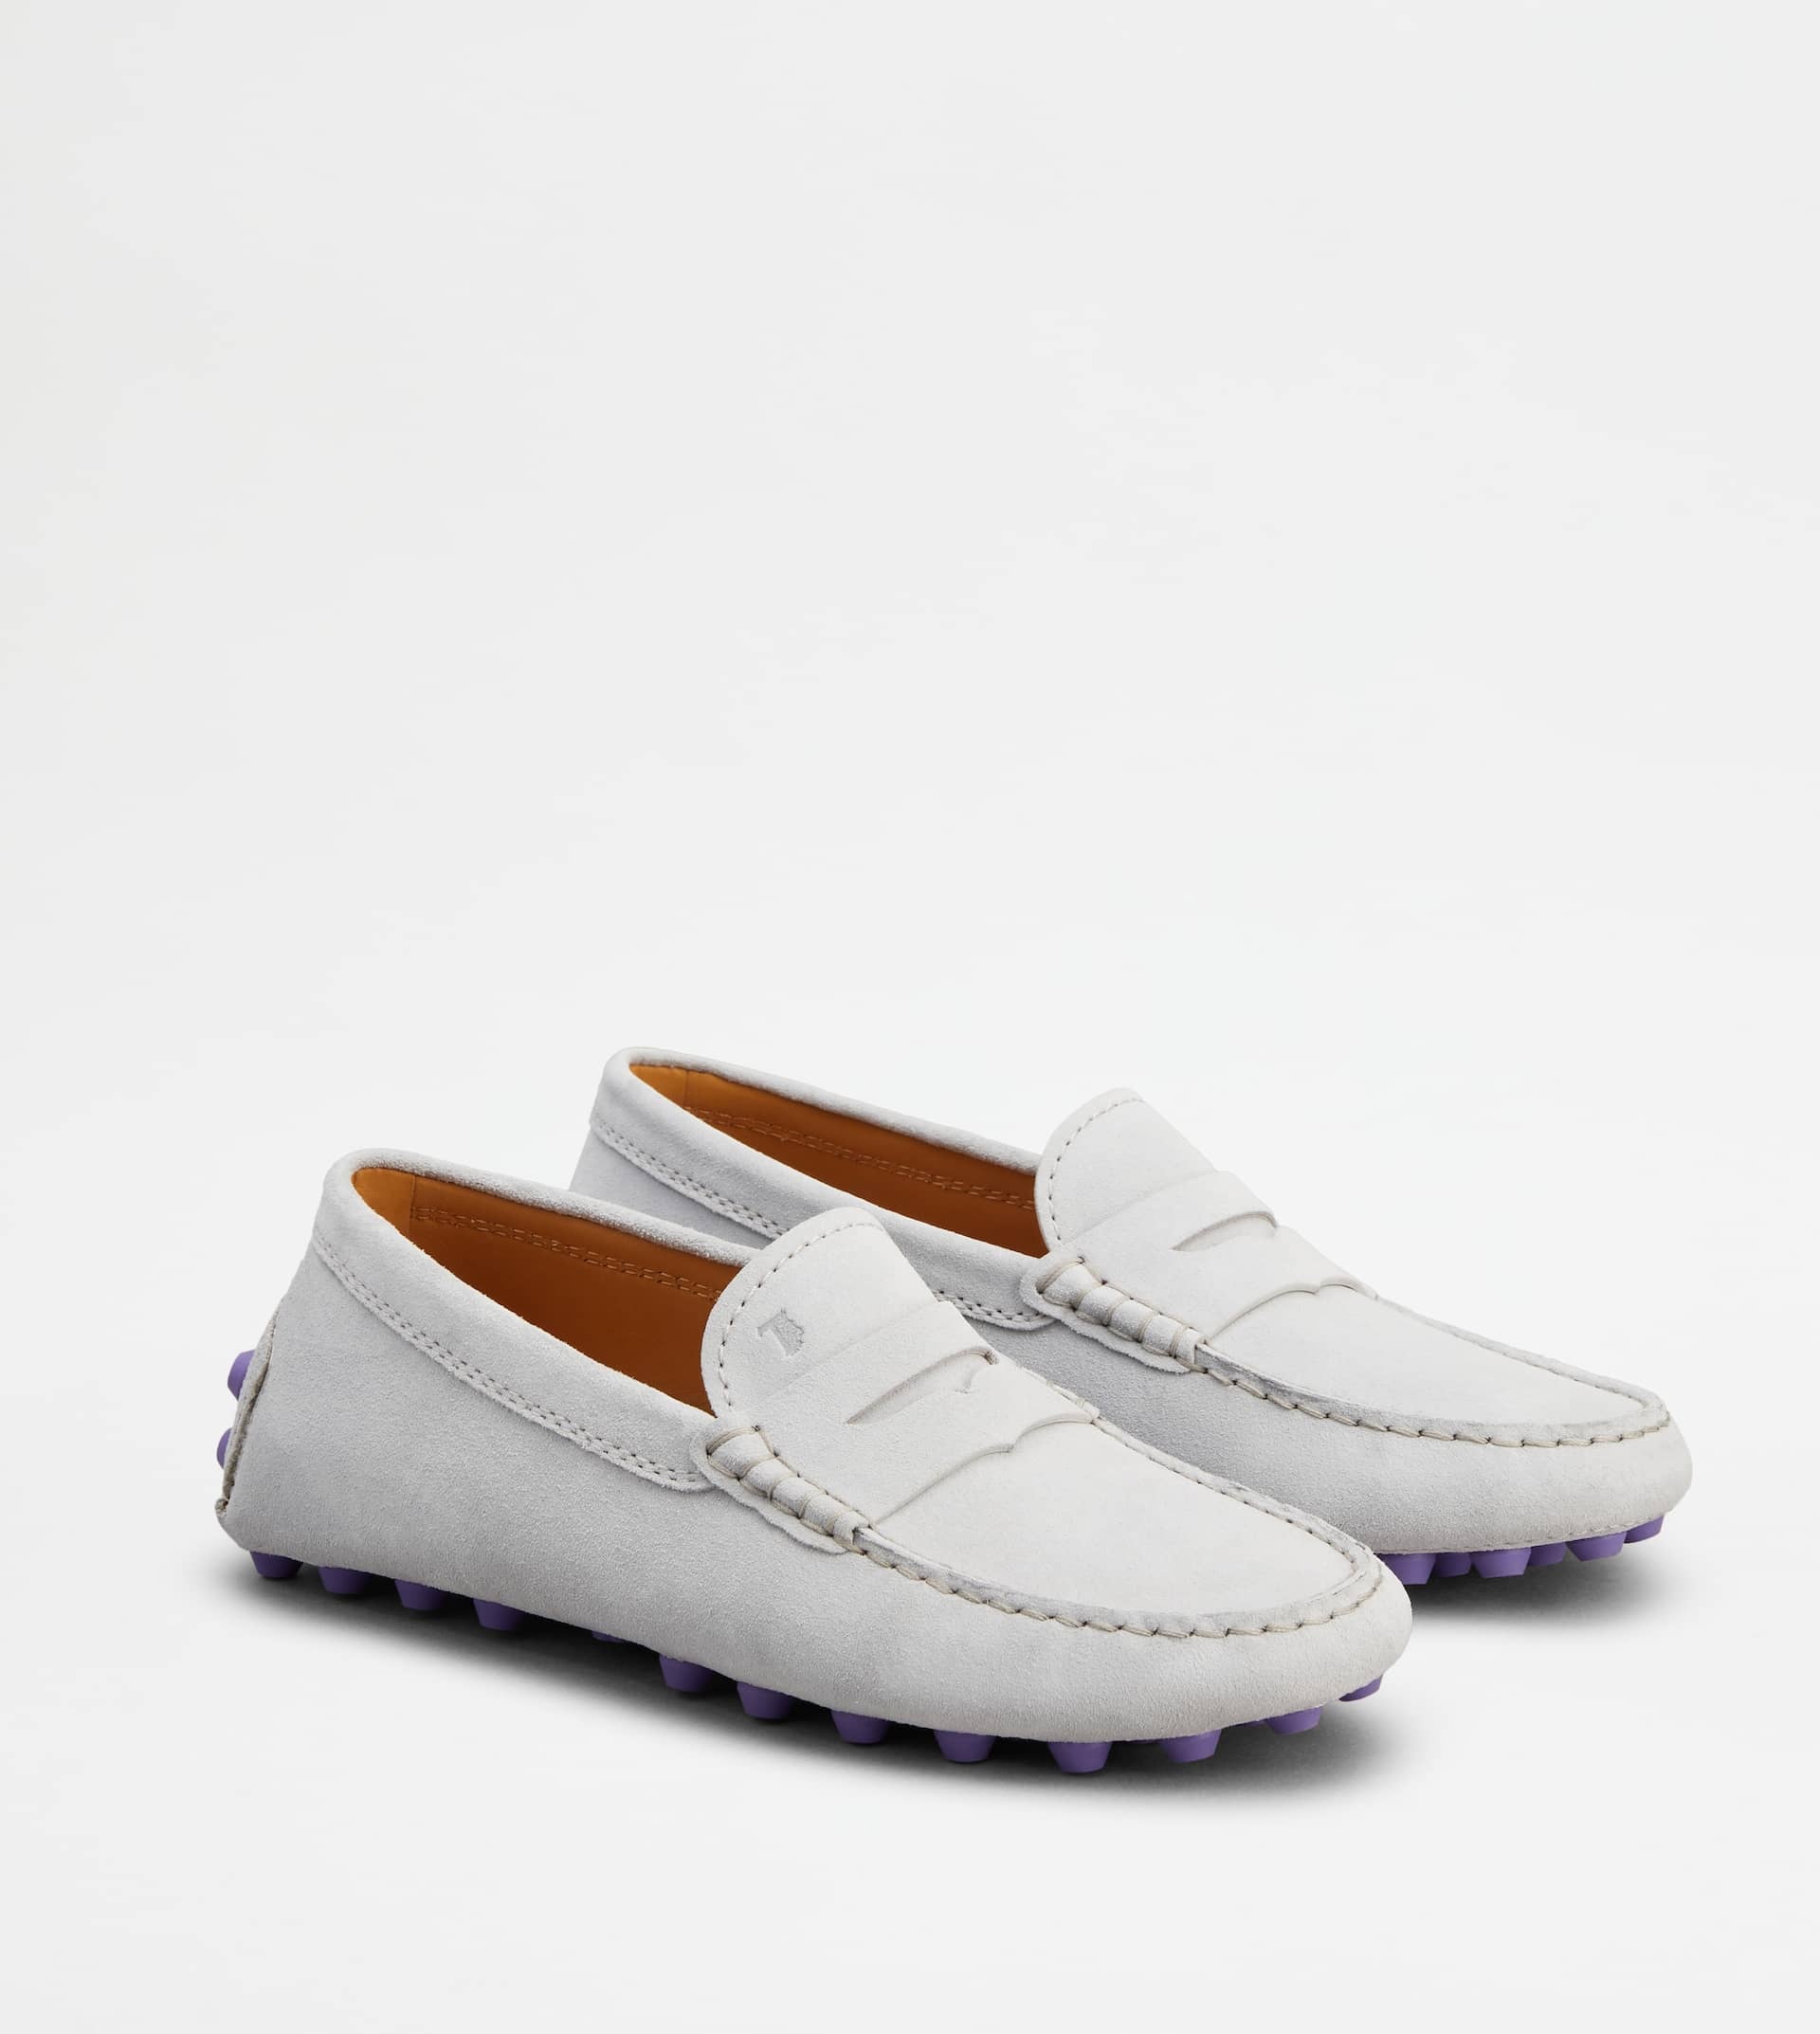 TOD'S GOMMINO BUBBLE IN LEATHER - GREY - 3